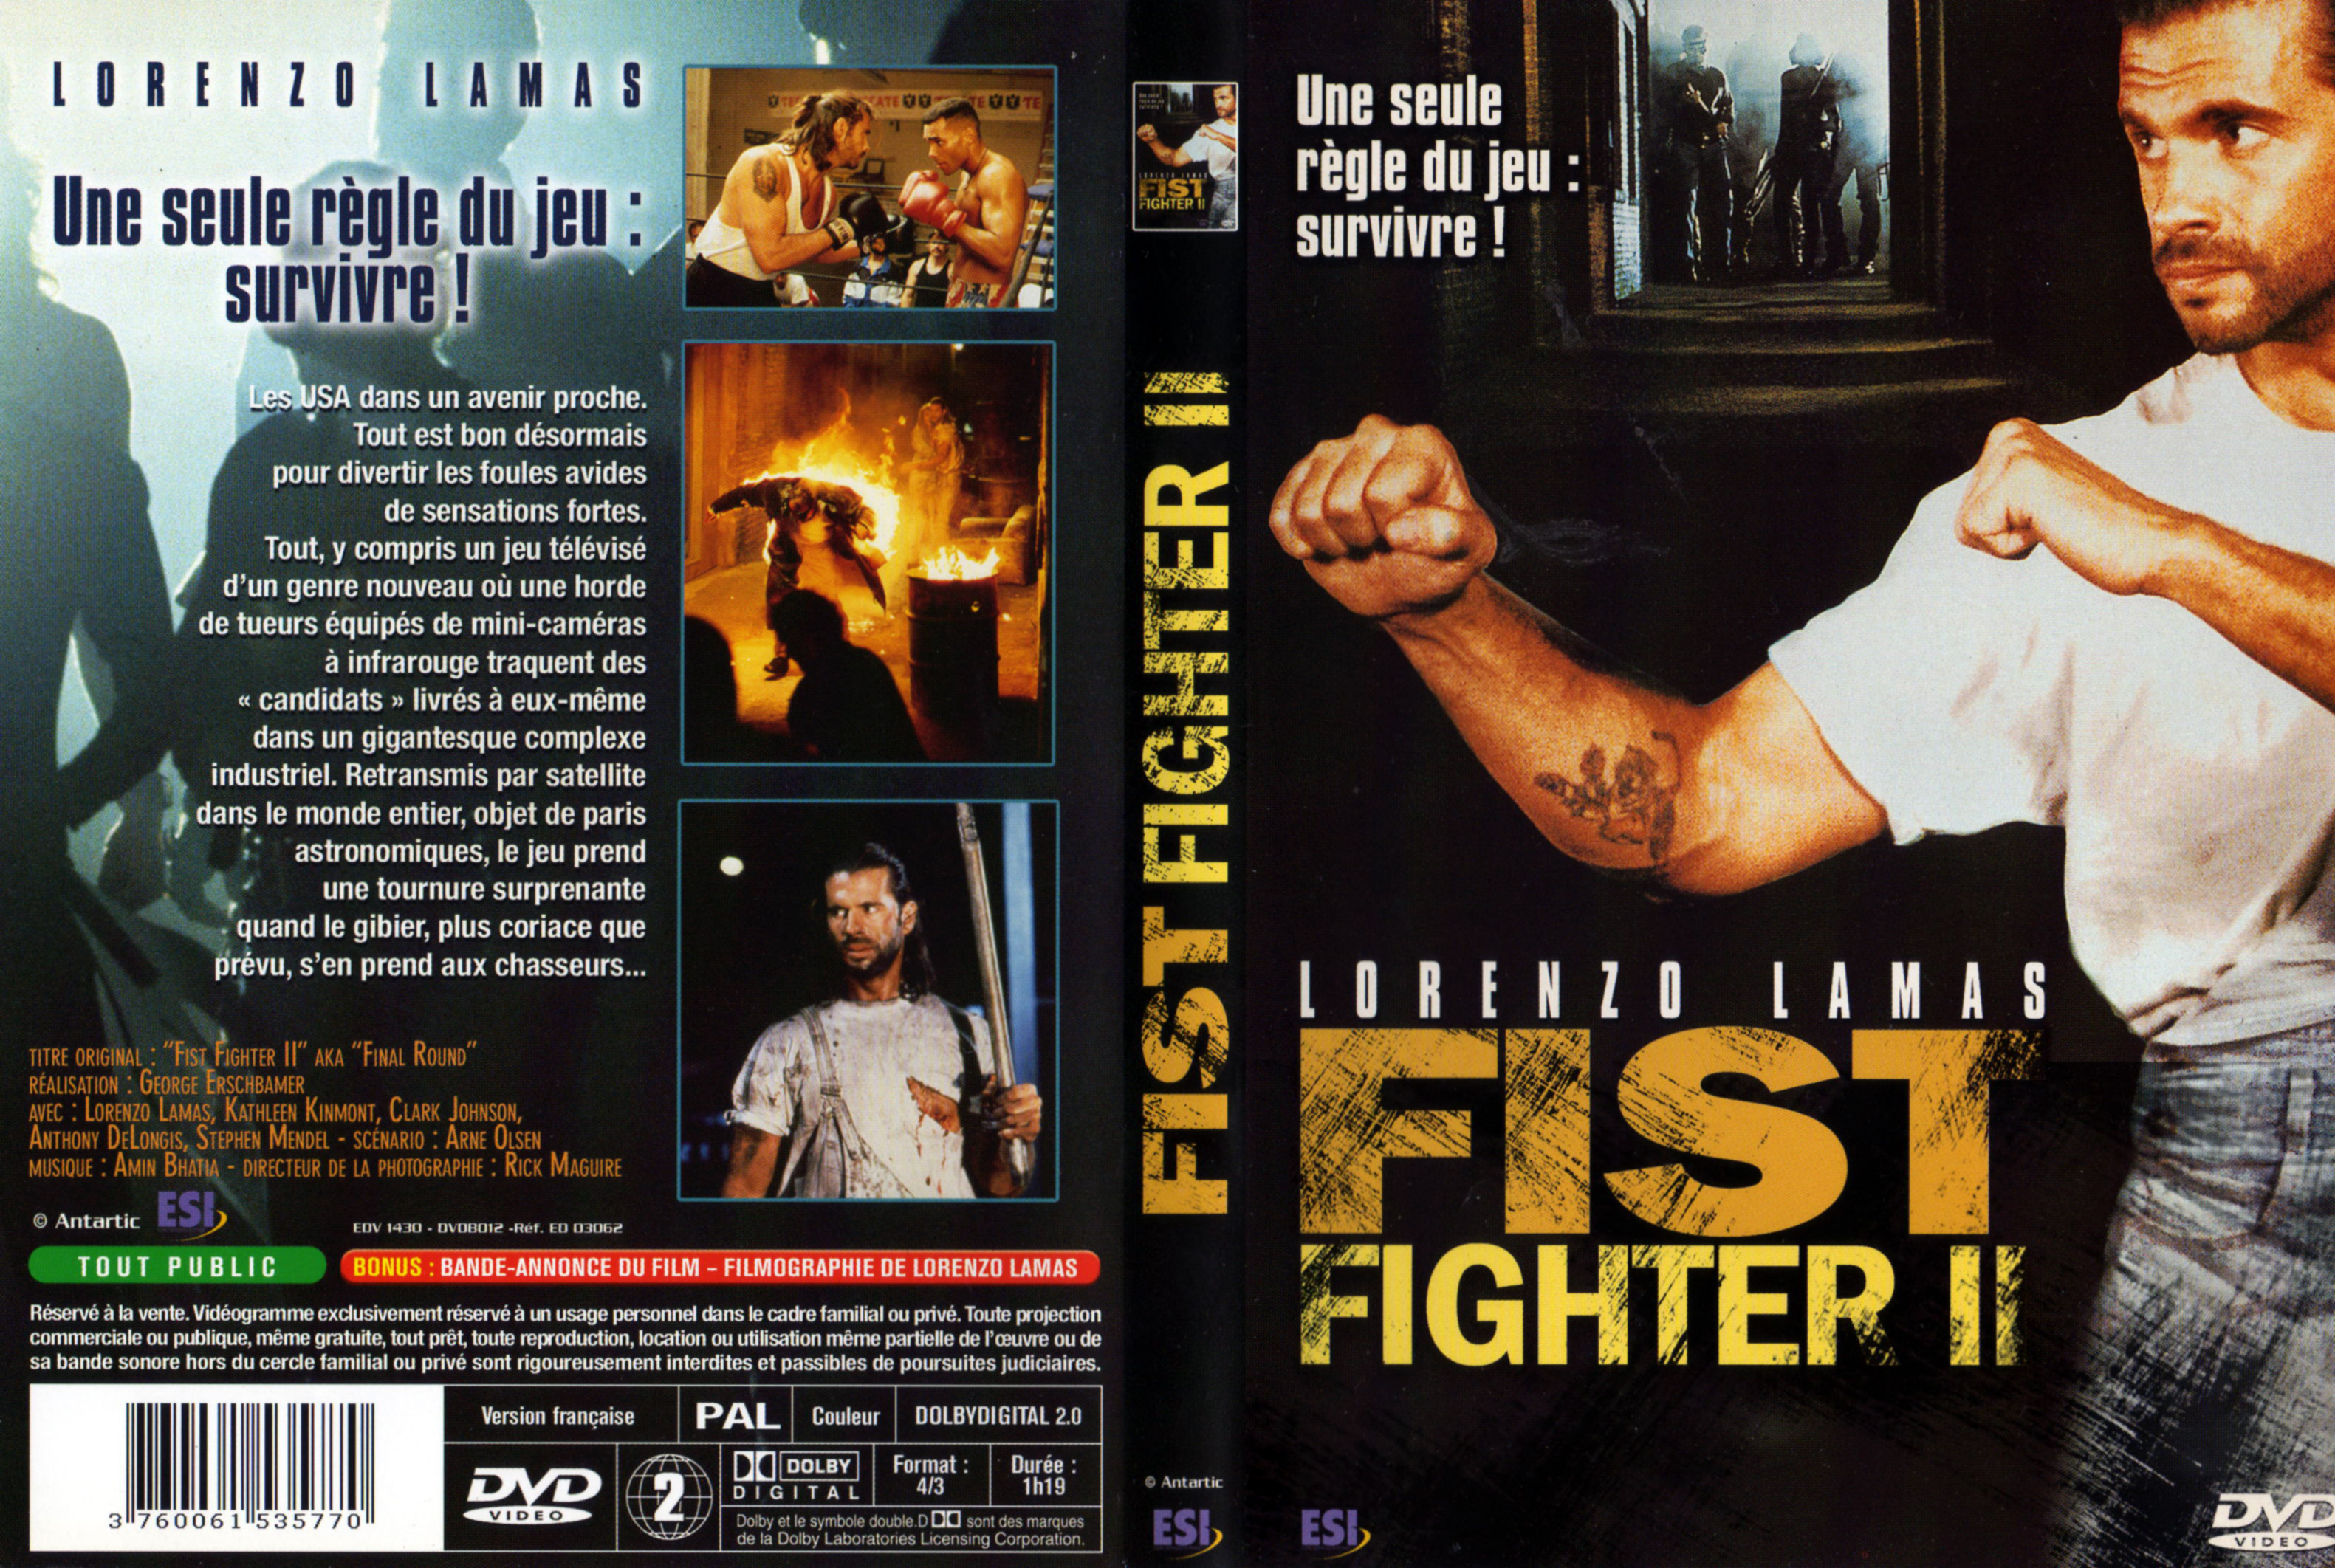 Jaquette DVD Fist fighter 2